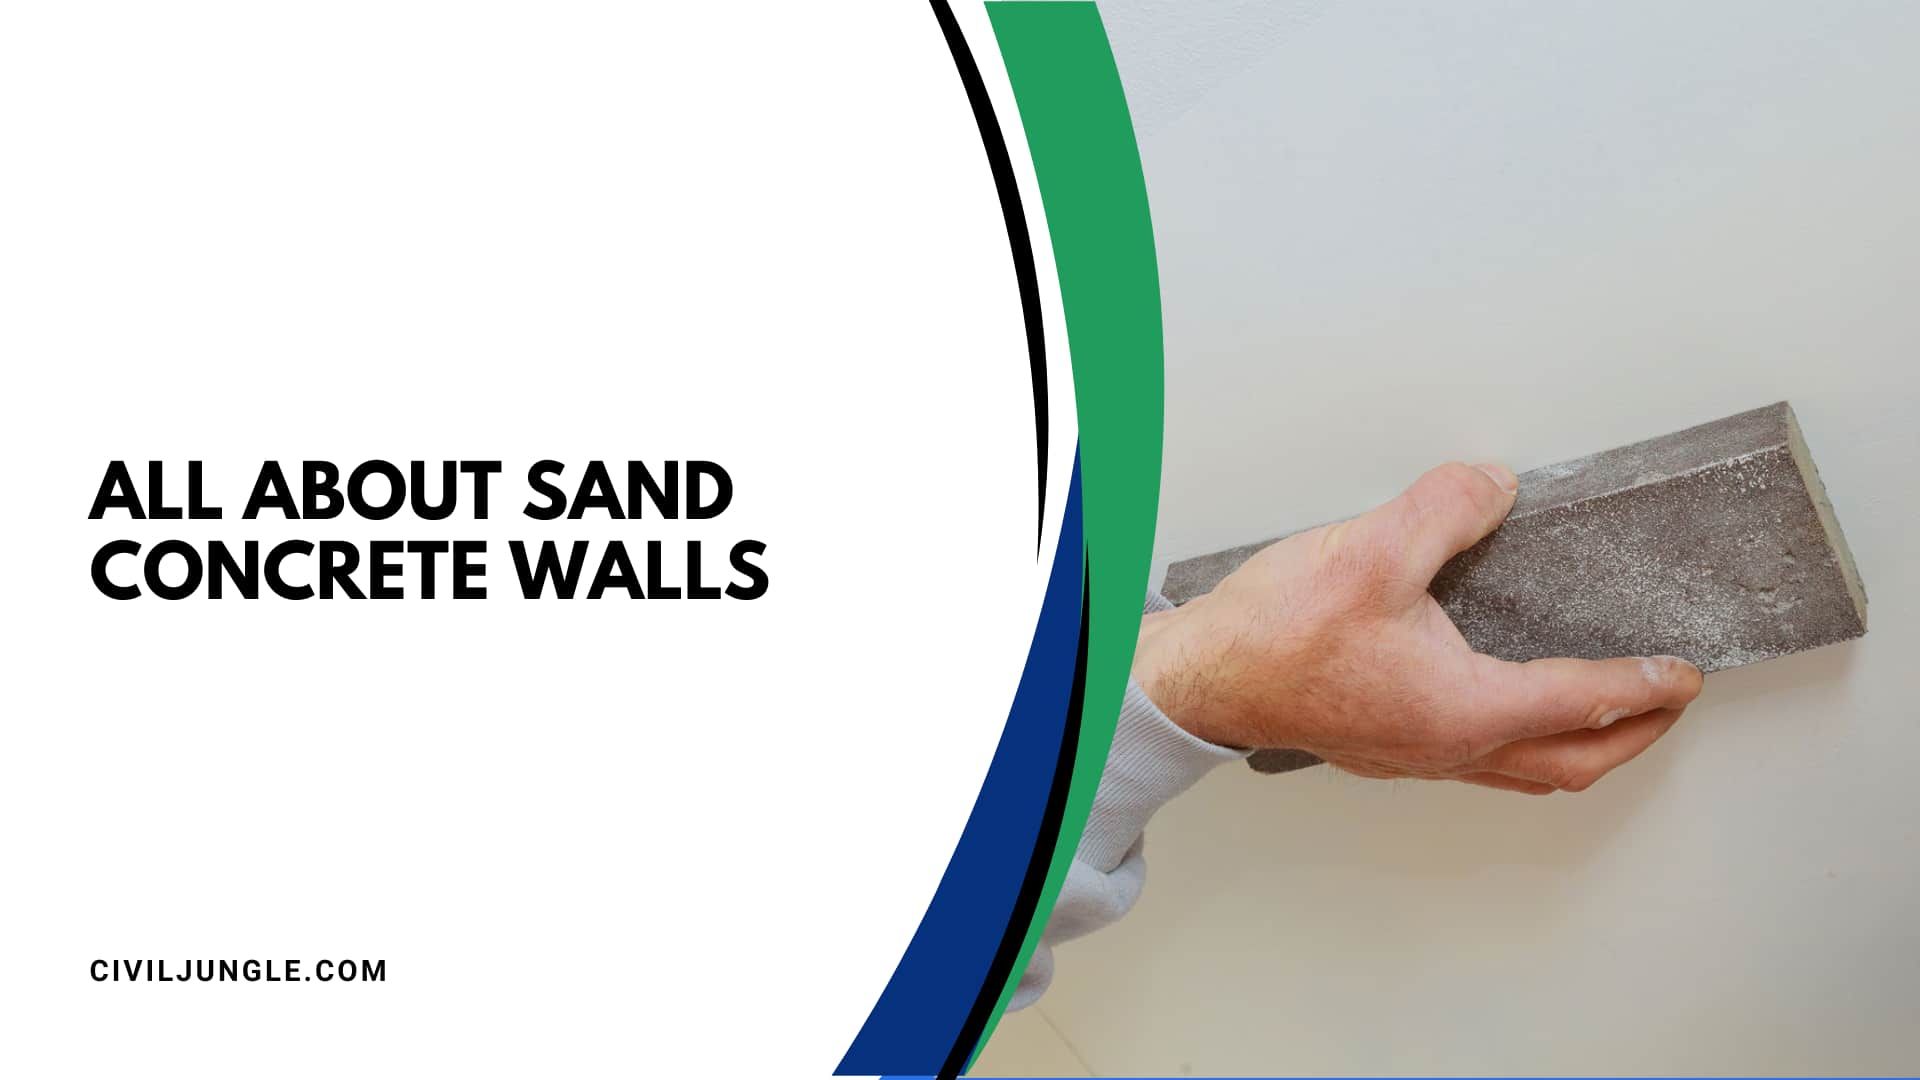 All About Sand Concrete Walls